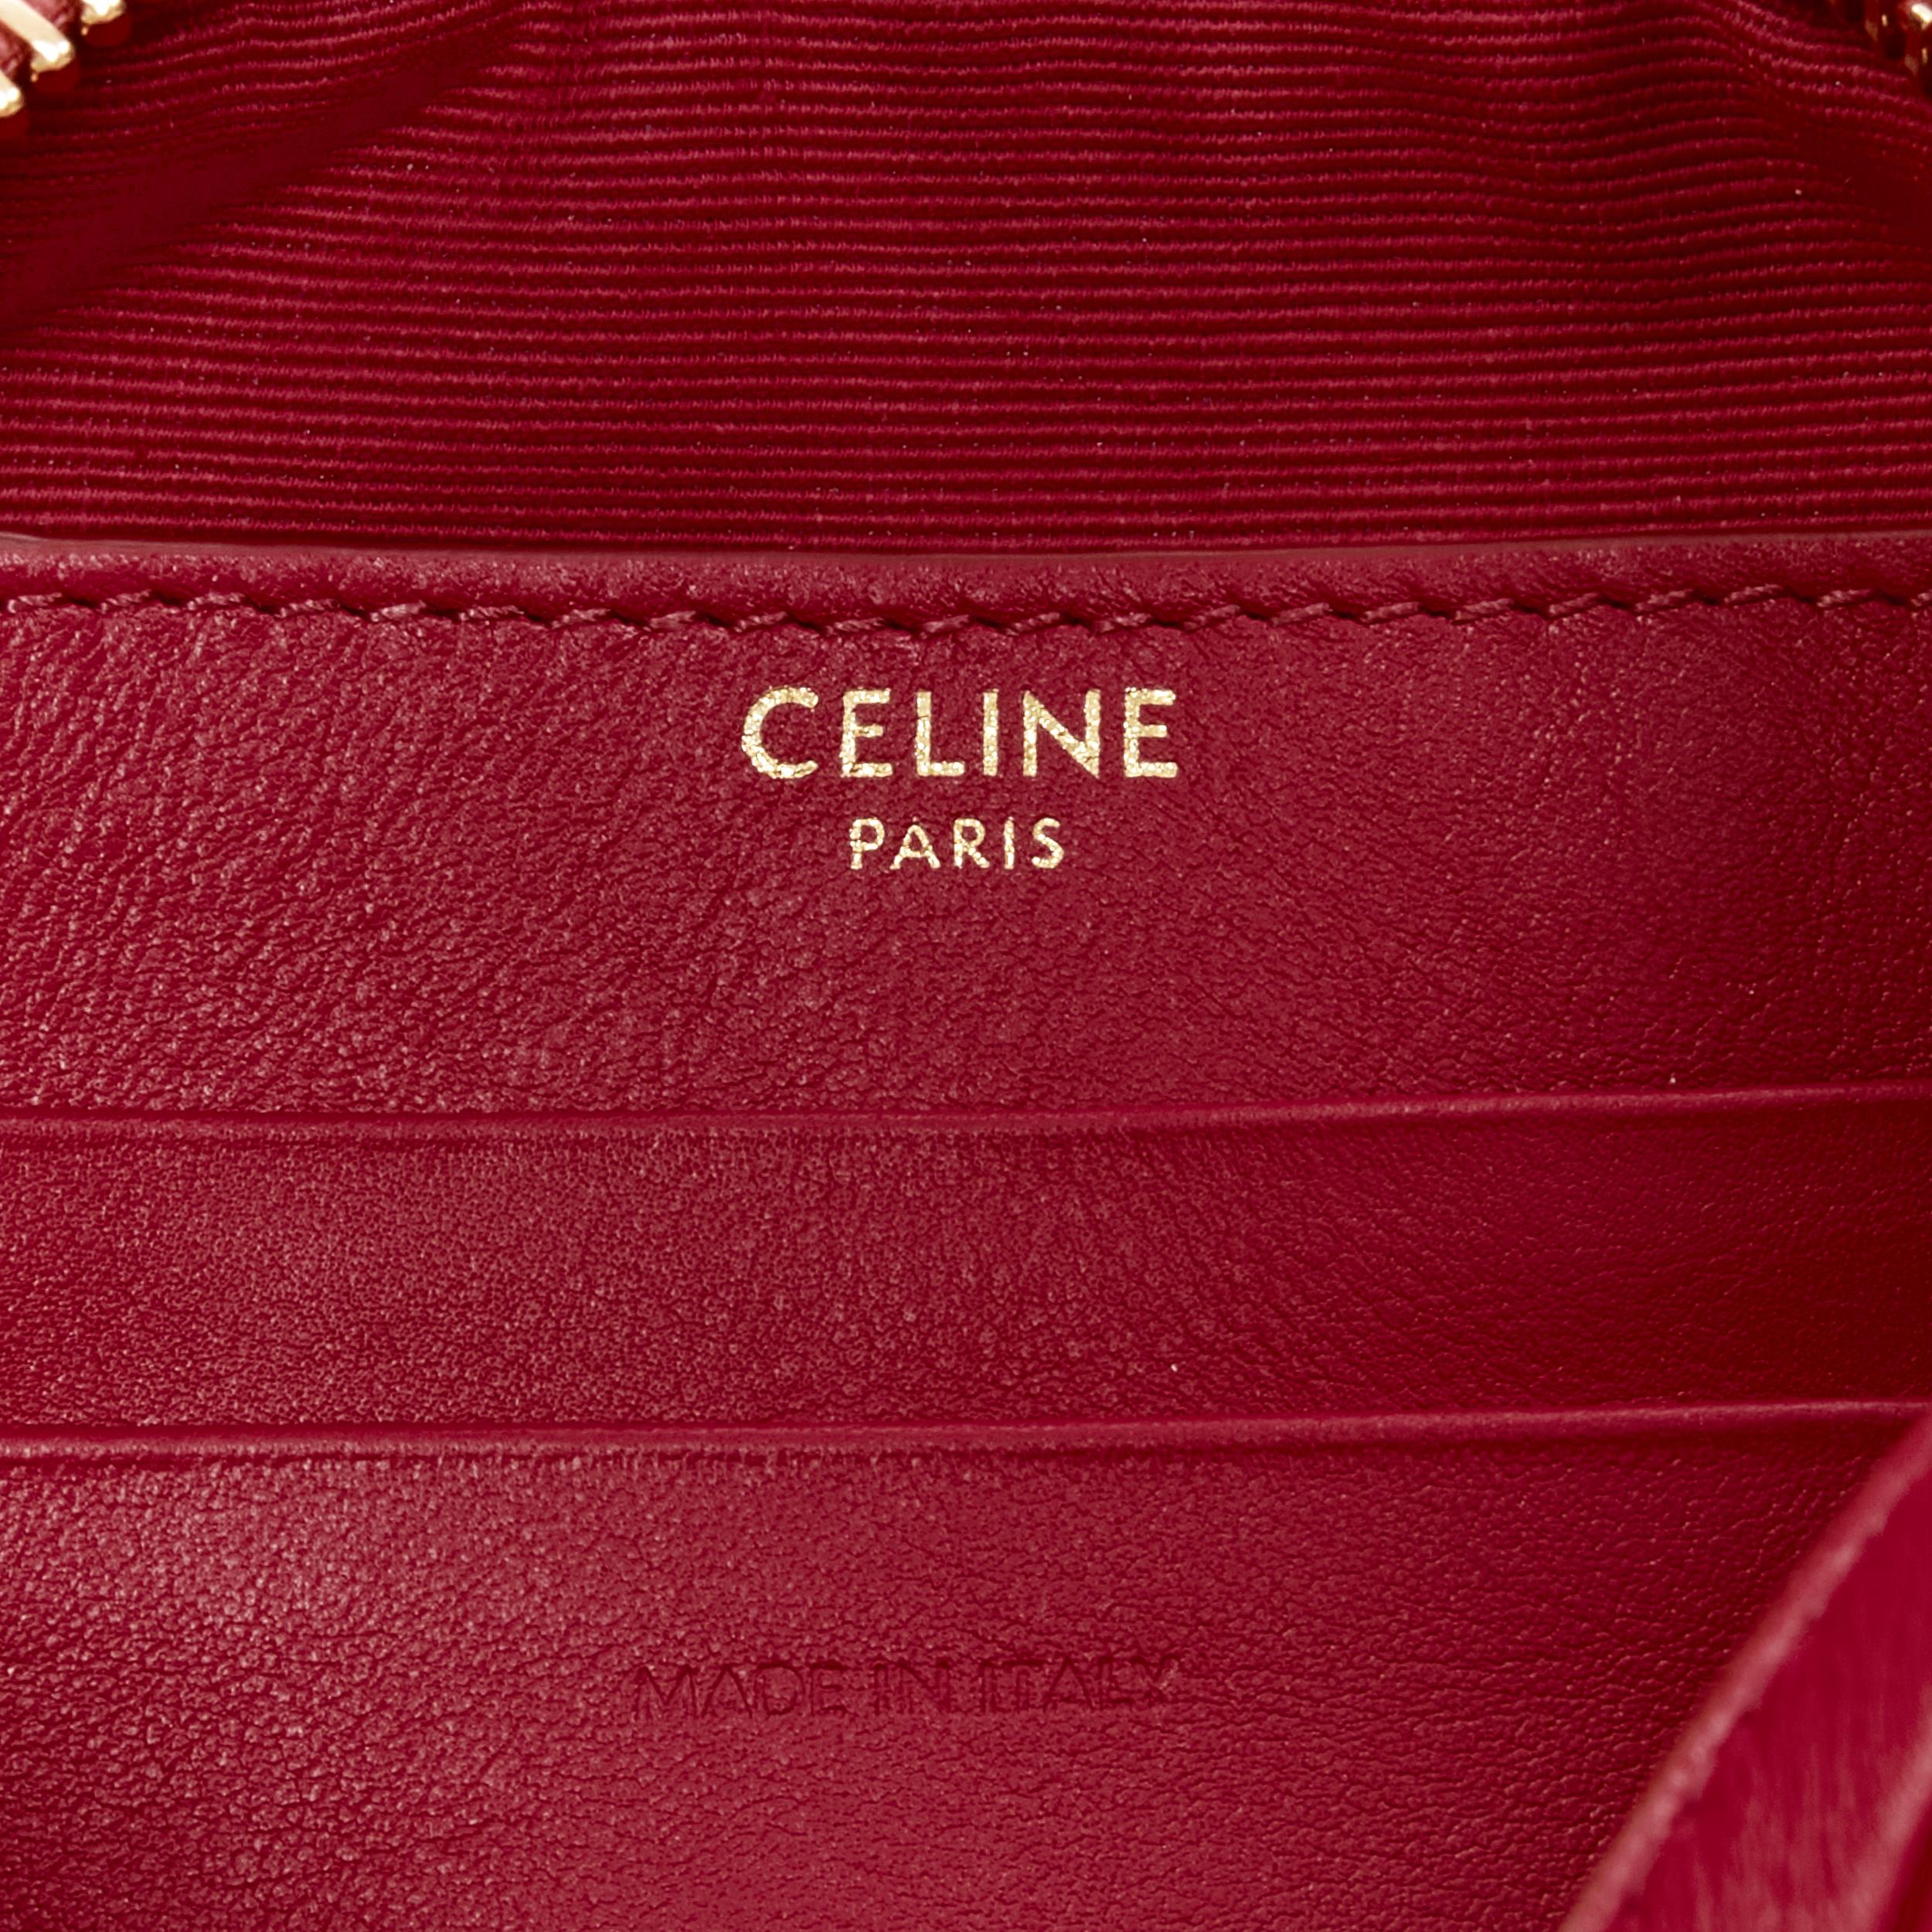 new CELINE Hedi Slimane 2019 C Charm red quilted small crossbody camera bag For Sale 5